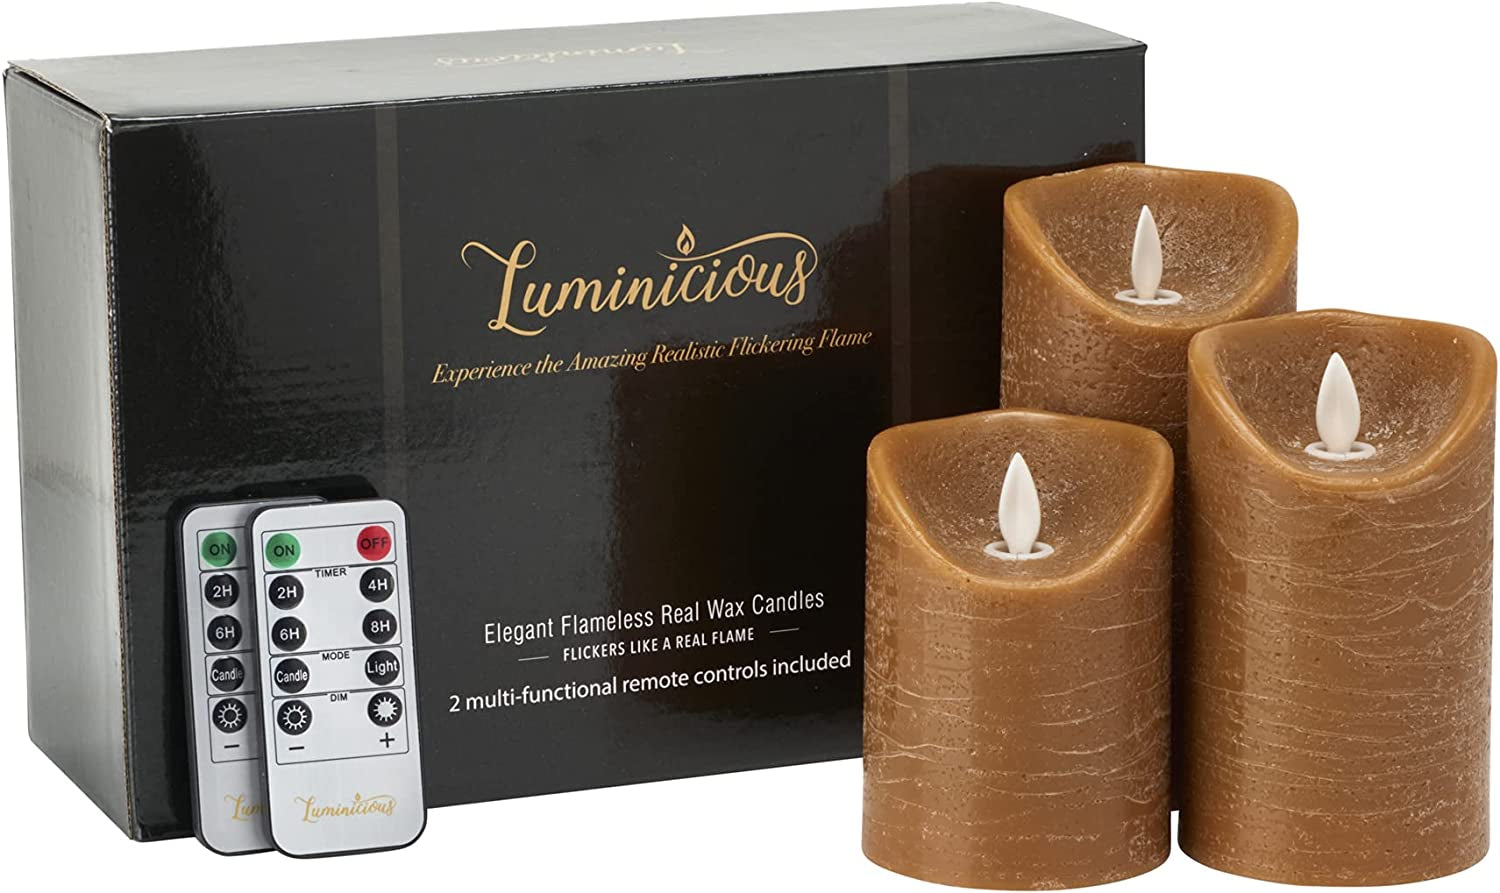 Luminicious, Flameless Candles Flickering LED | Battery Operated Electric Pillar Candle | Realistic Moving Flame Flicker with 2 Remote Controls & Timer | Real Wax Toffee Brown | Great Home Decor | Decorative Gift